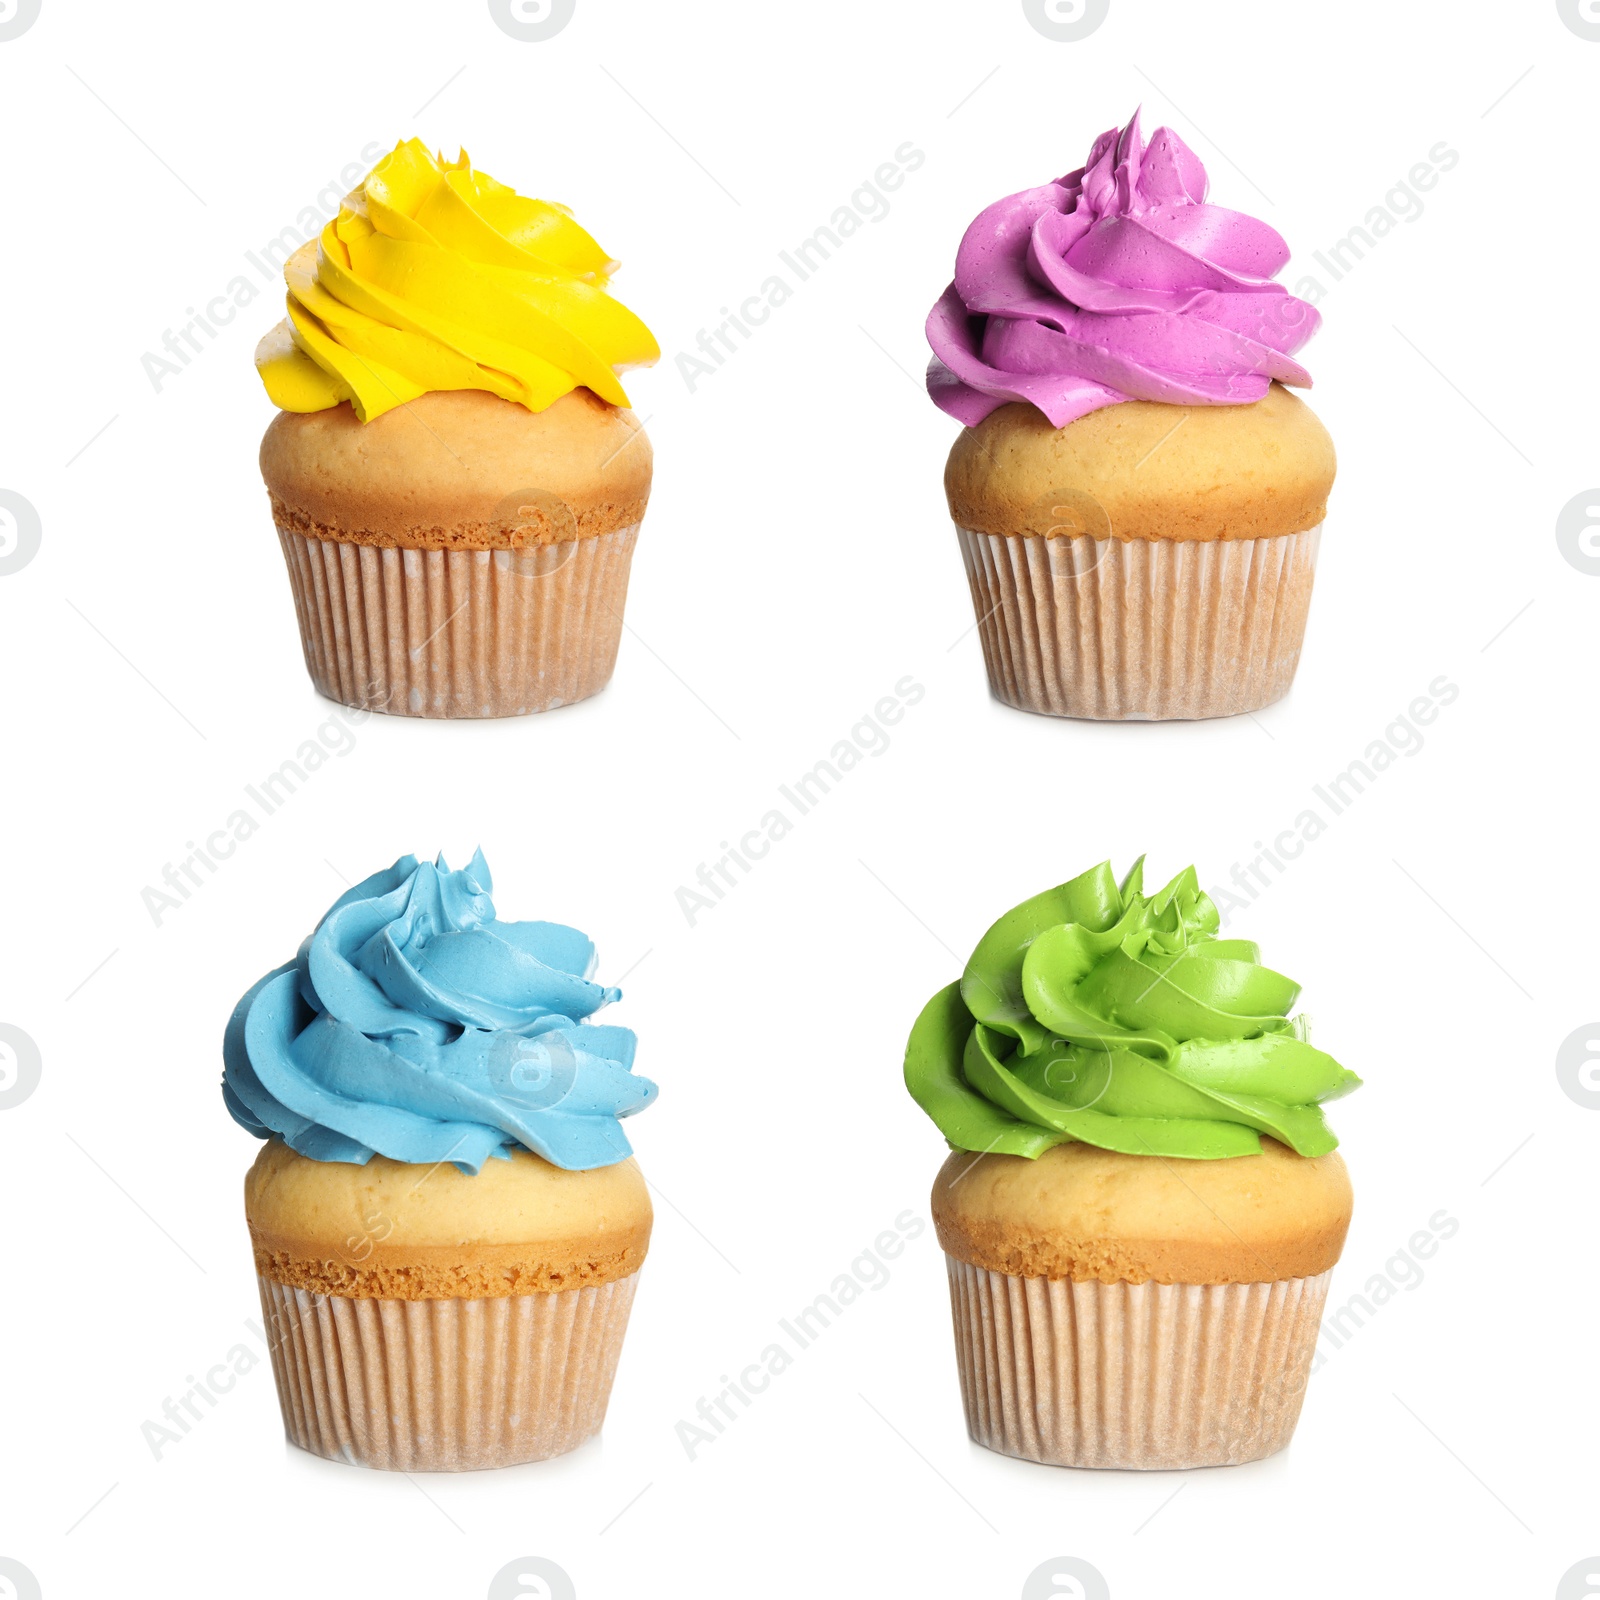 Image of Set of delicious birthday cupcakes on white background